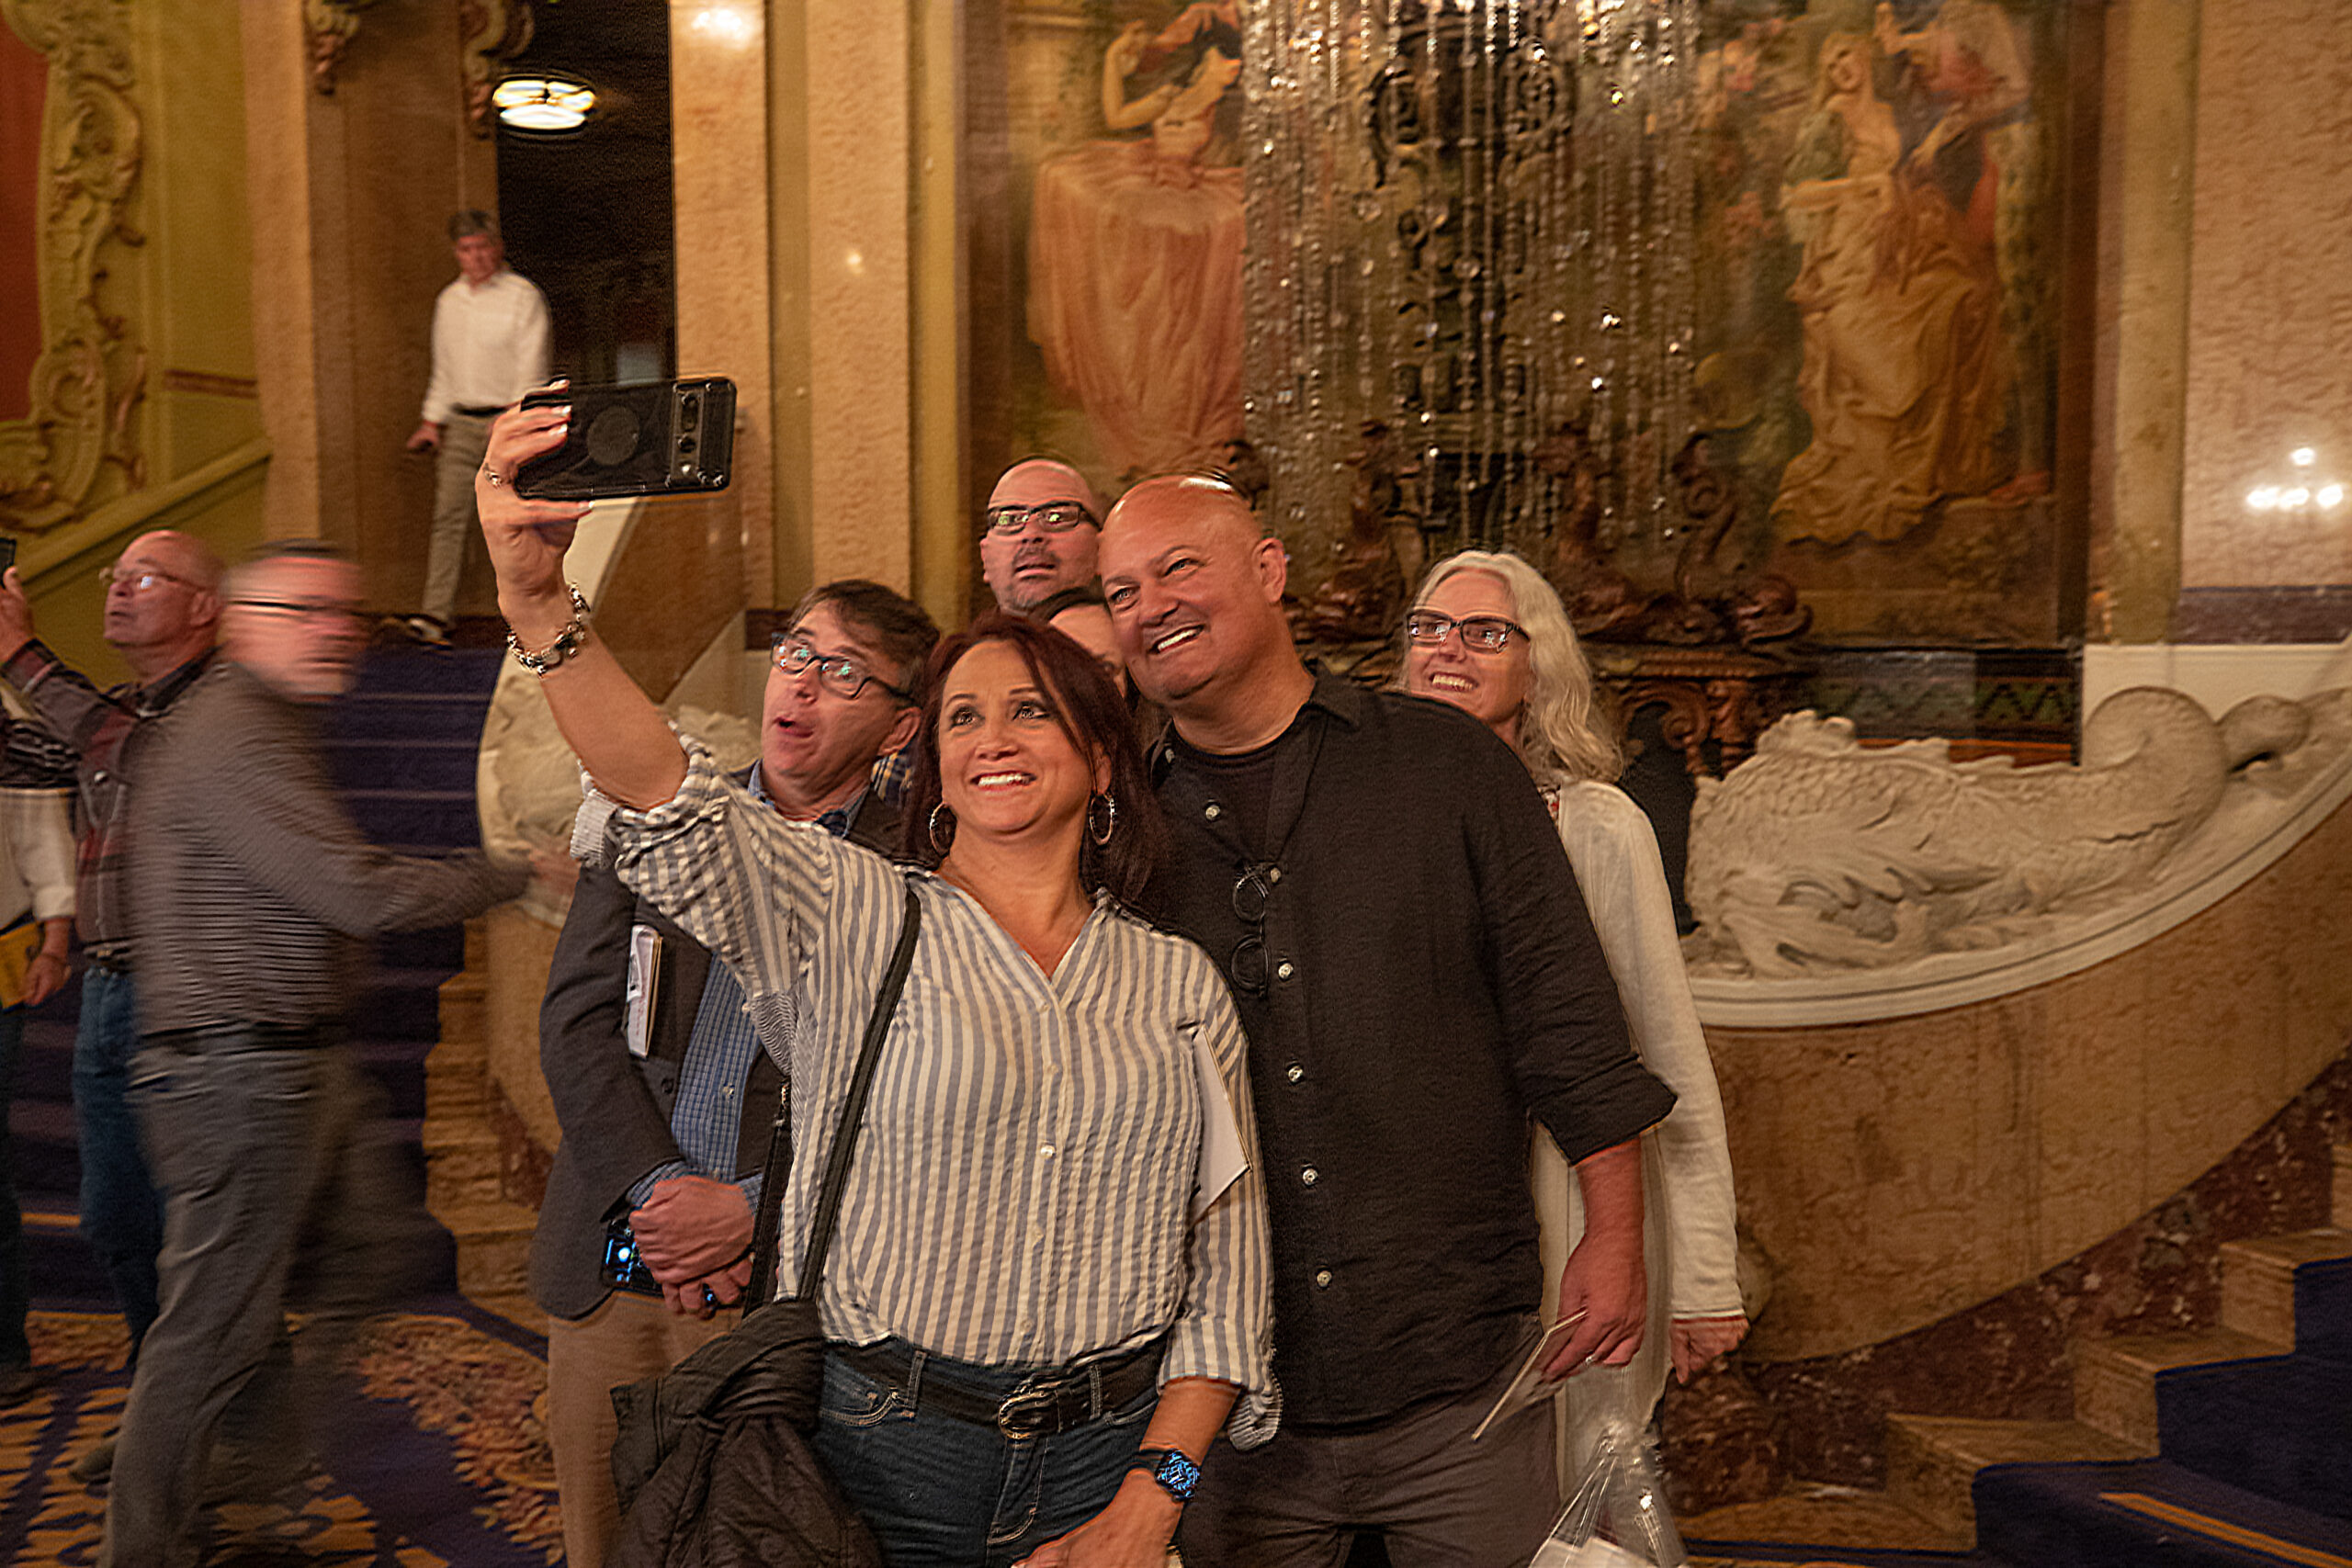 Guests at Last Remaining Seats take selfies in the historic L.A. Theatre.